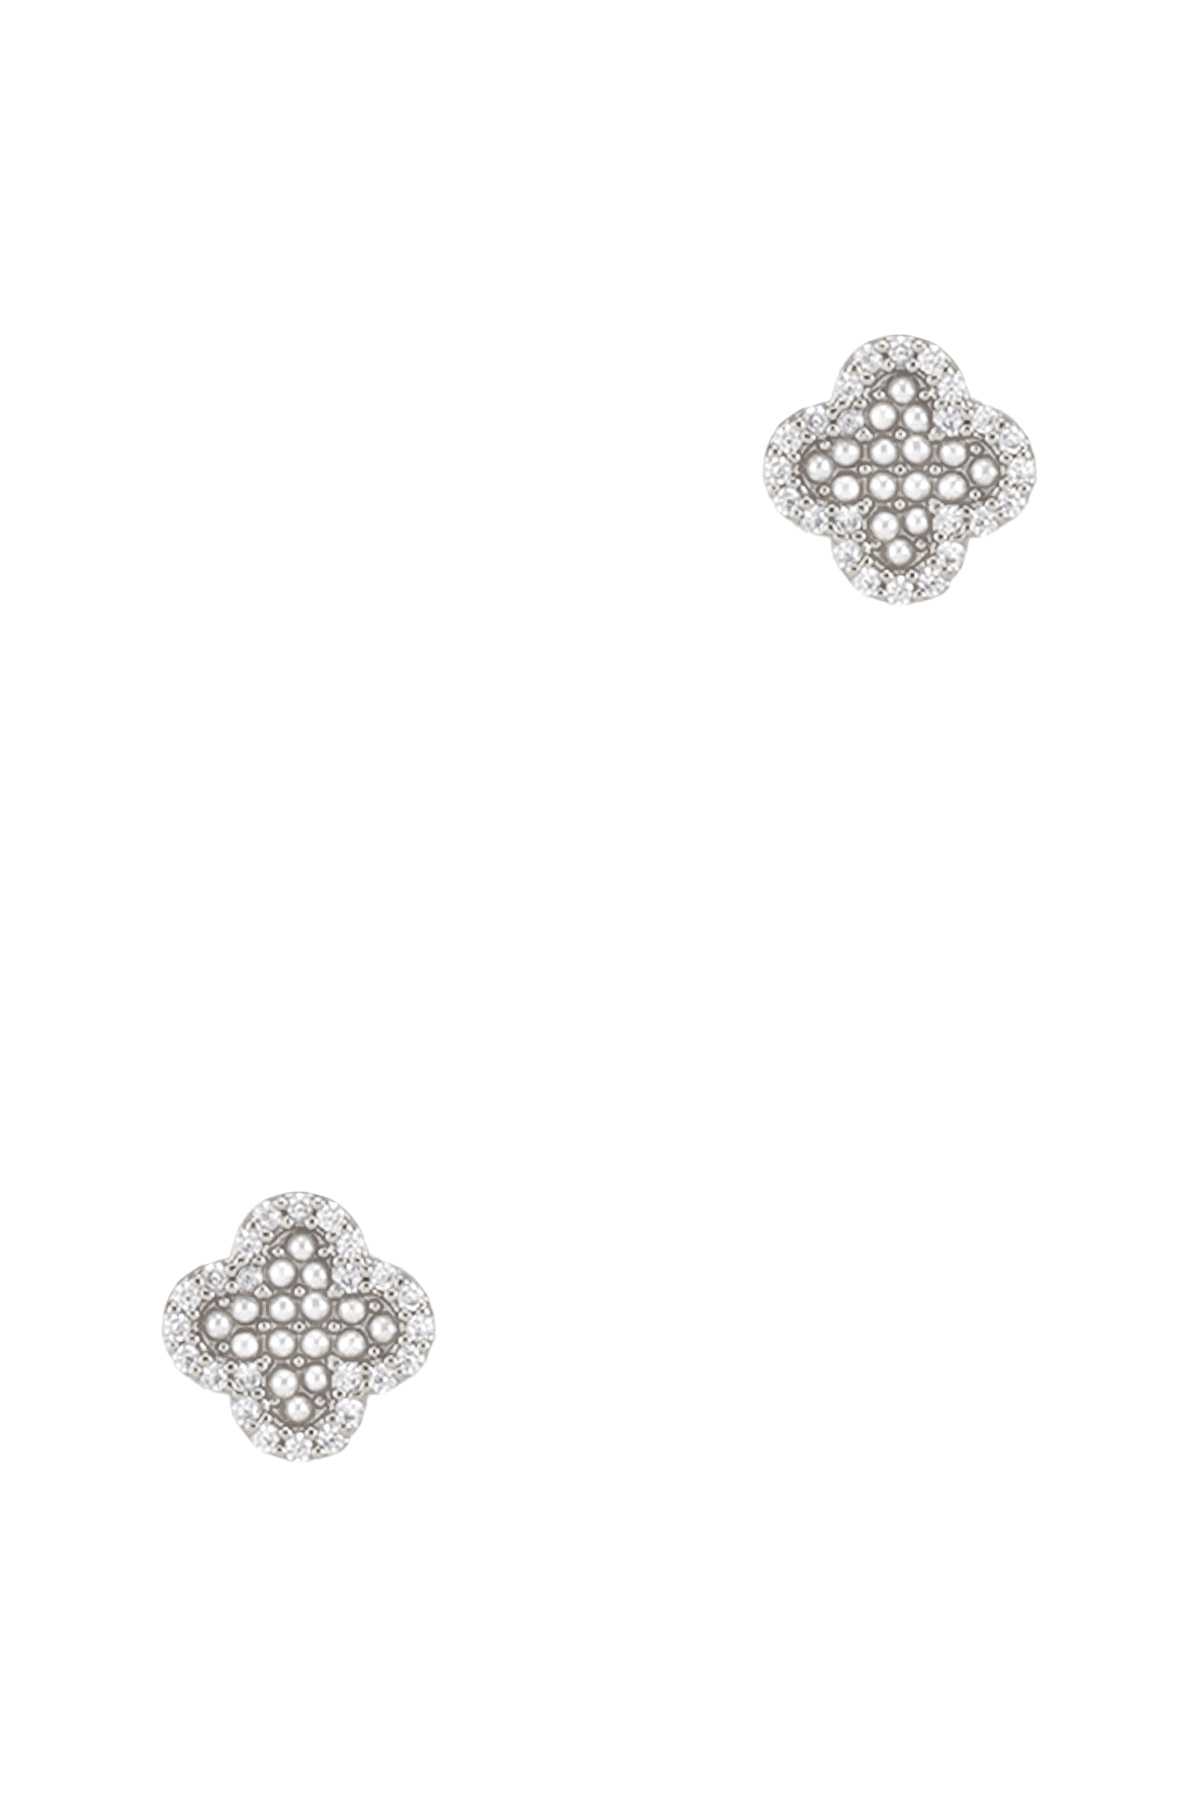 Rhinestone Clover with Pearl Beads Earring